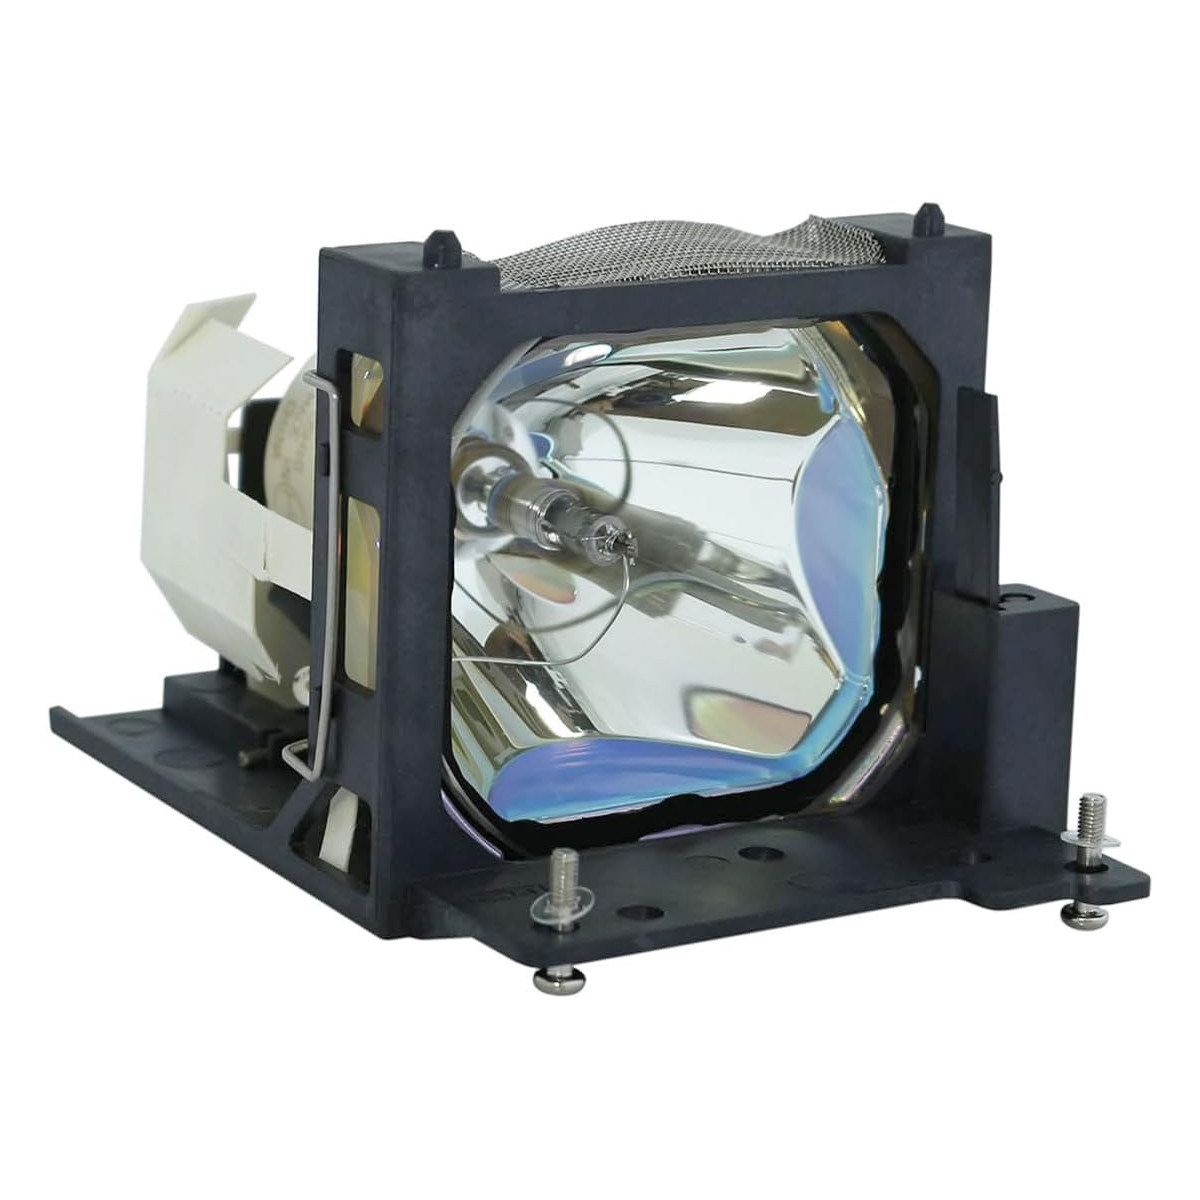 Replacement Projector lamp 78-6969-9565-9 For 3M X40 X401 MP7740i  MP7740iA